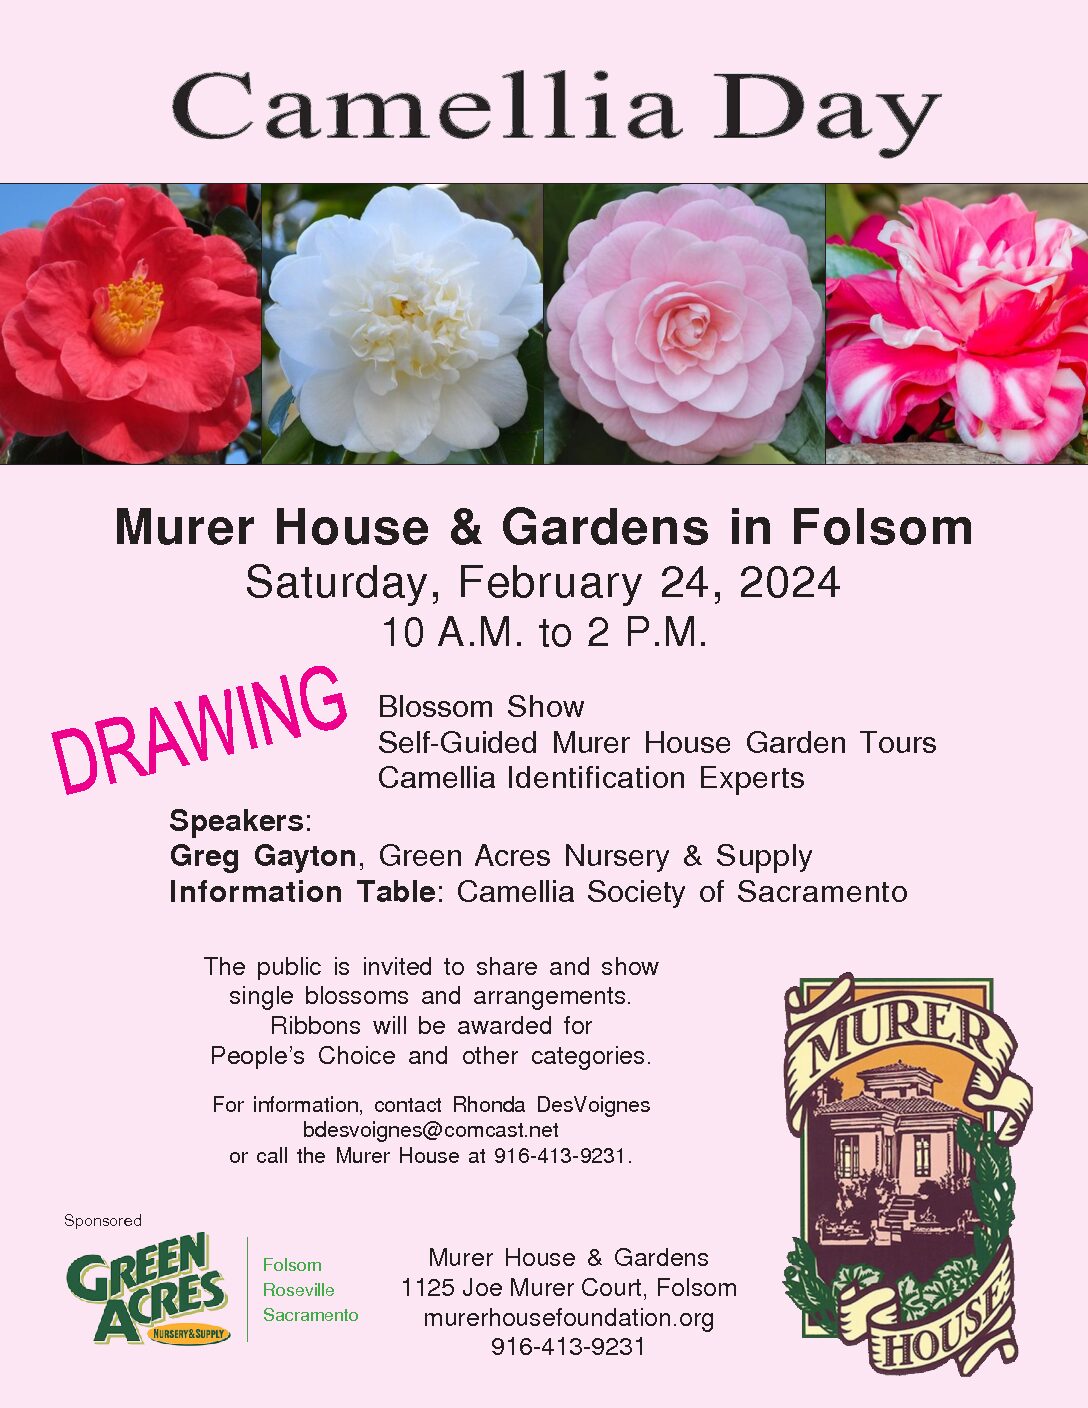 https://murerhousefoundation.org/events-new-layout/